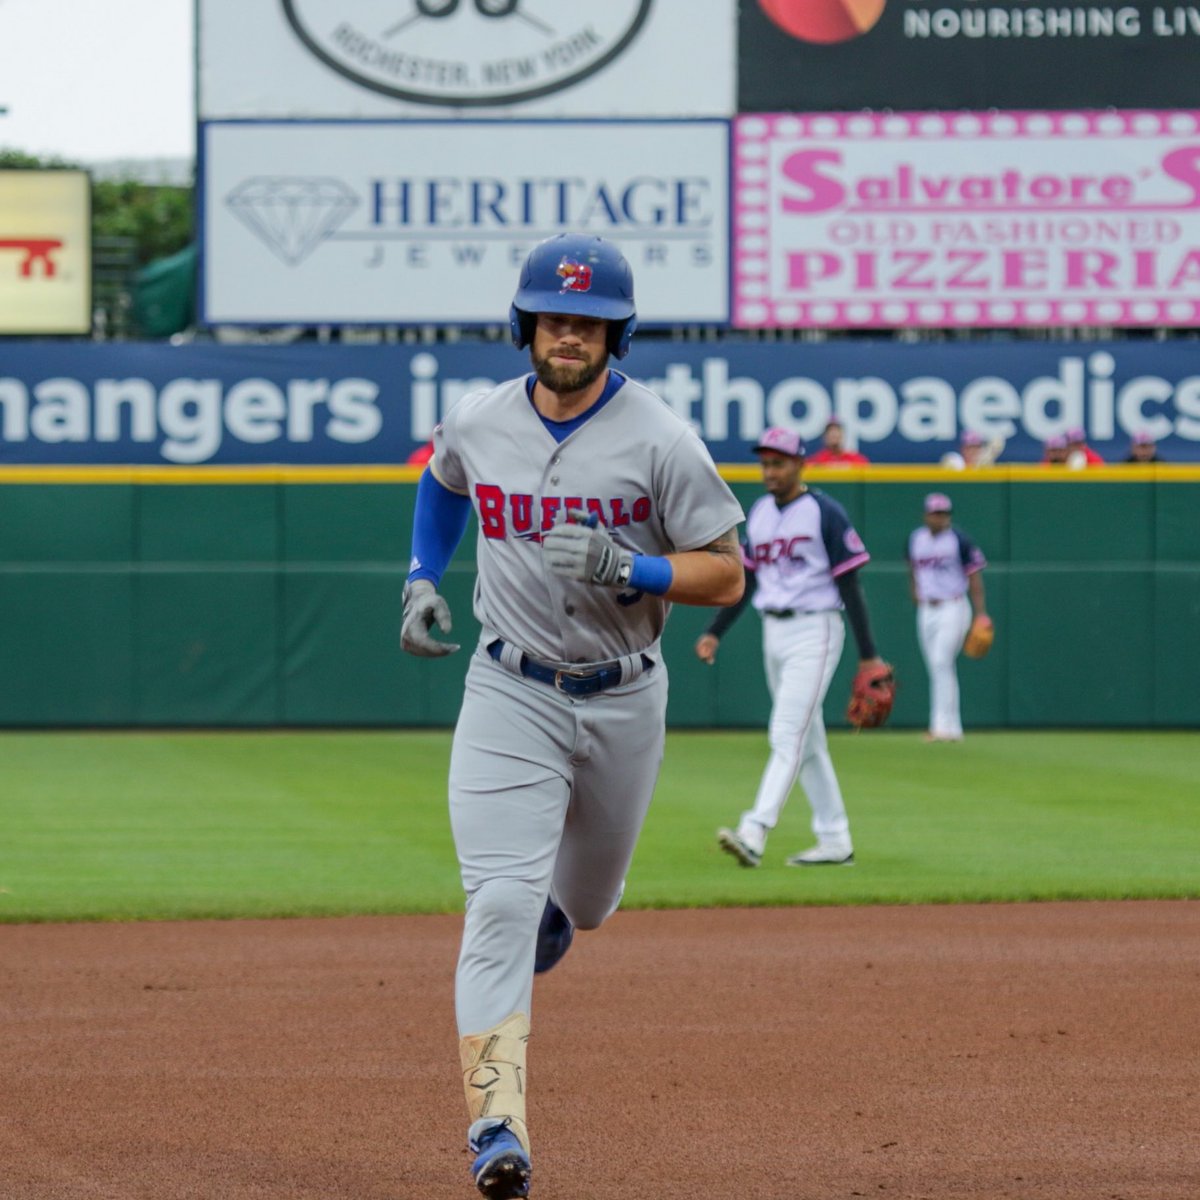 Nathan tonight 😮‍💨

6/6 | 2 2B | HR | 4 RBI

#Bisons | #TotheCore